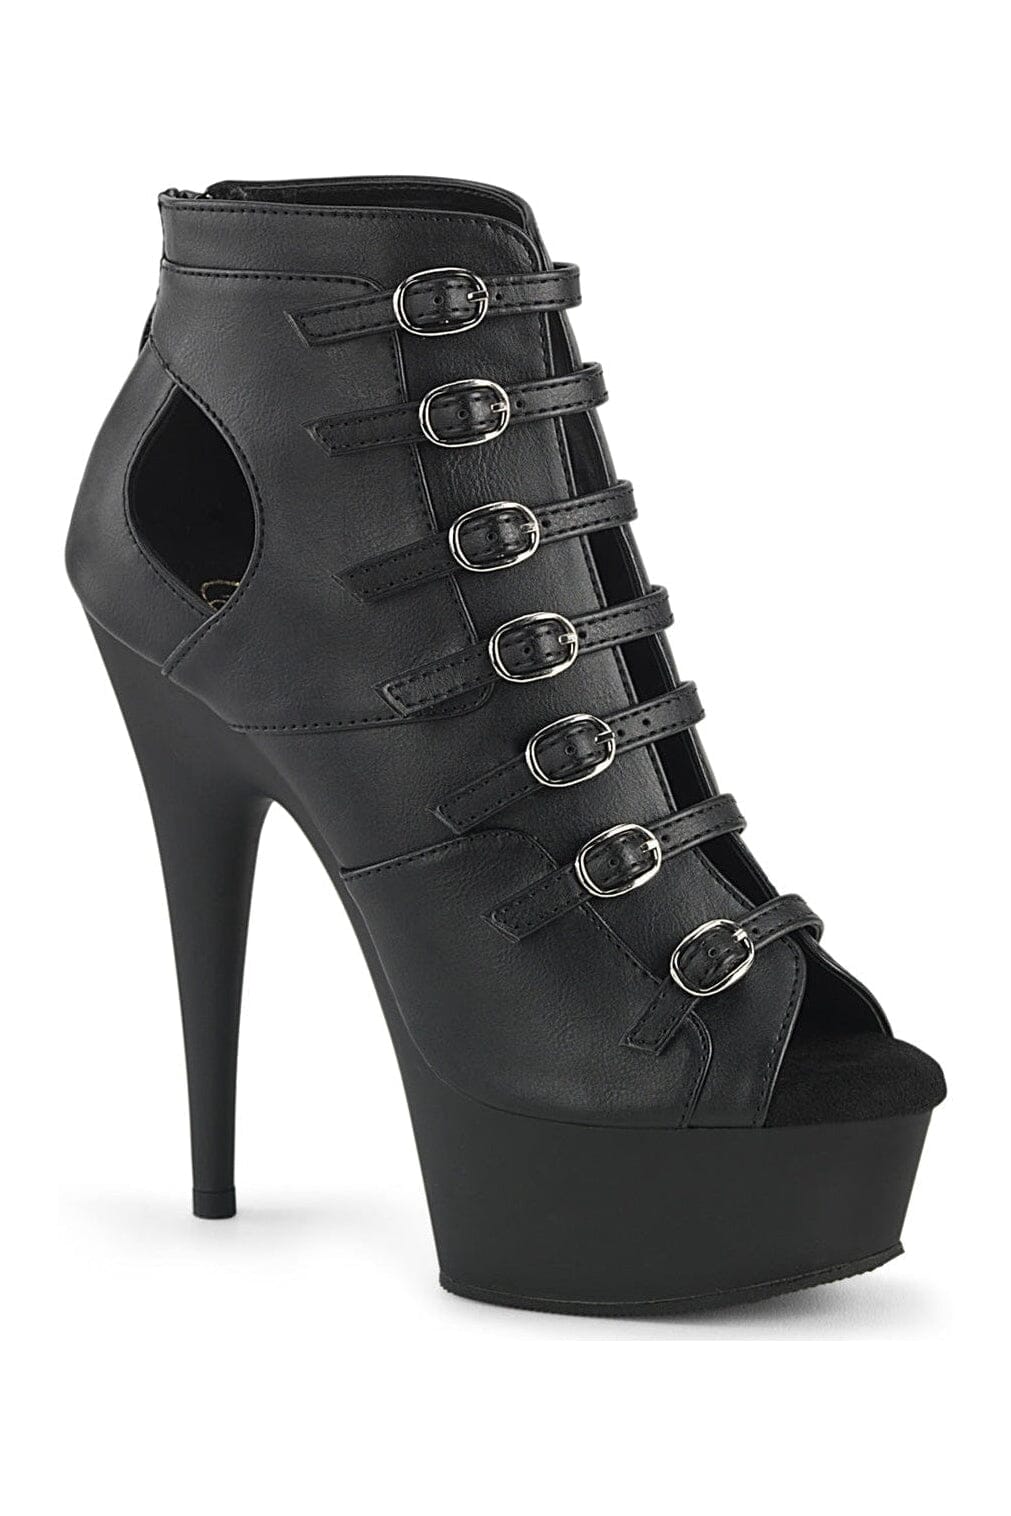 DELIGHT-600-11 Black Faux Leather Ankle Boot-Ankle Boots-Pleaser-Black-10-Faux Leather-SEXYSHOES.COM